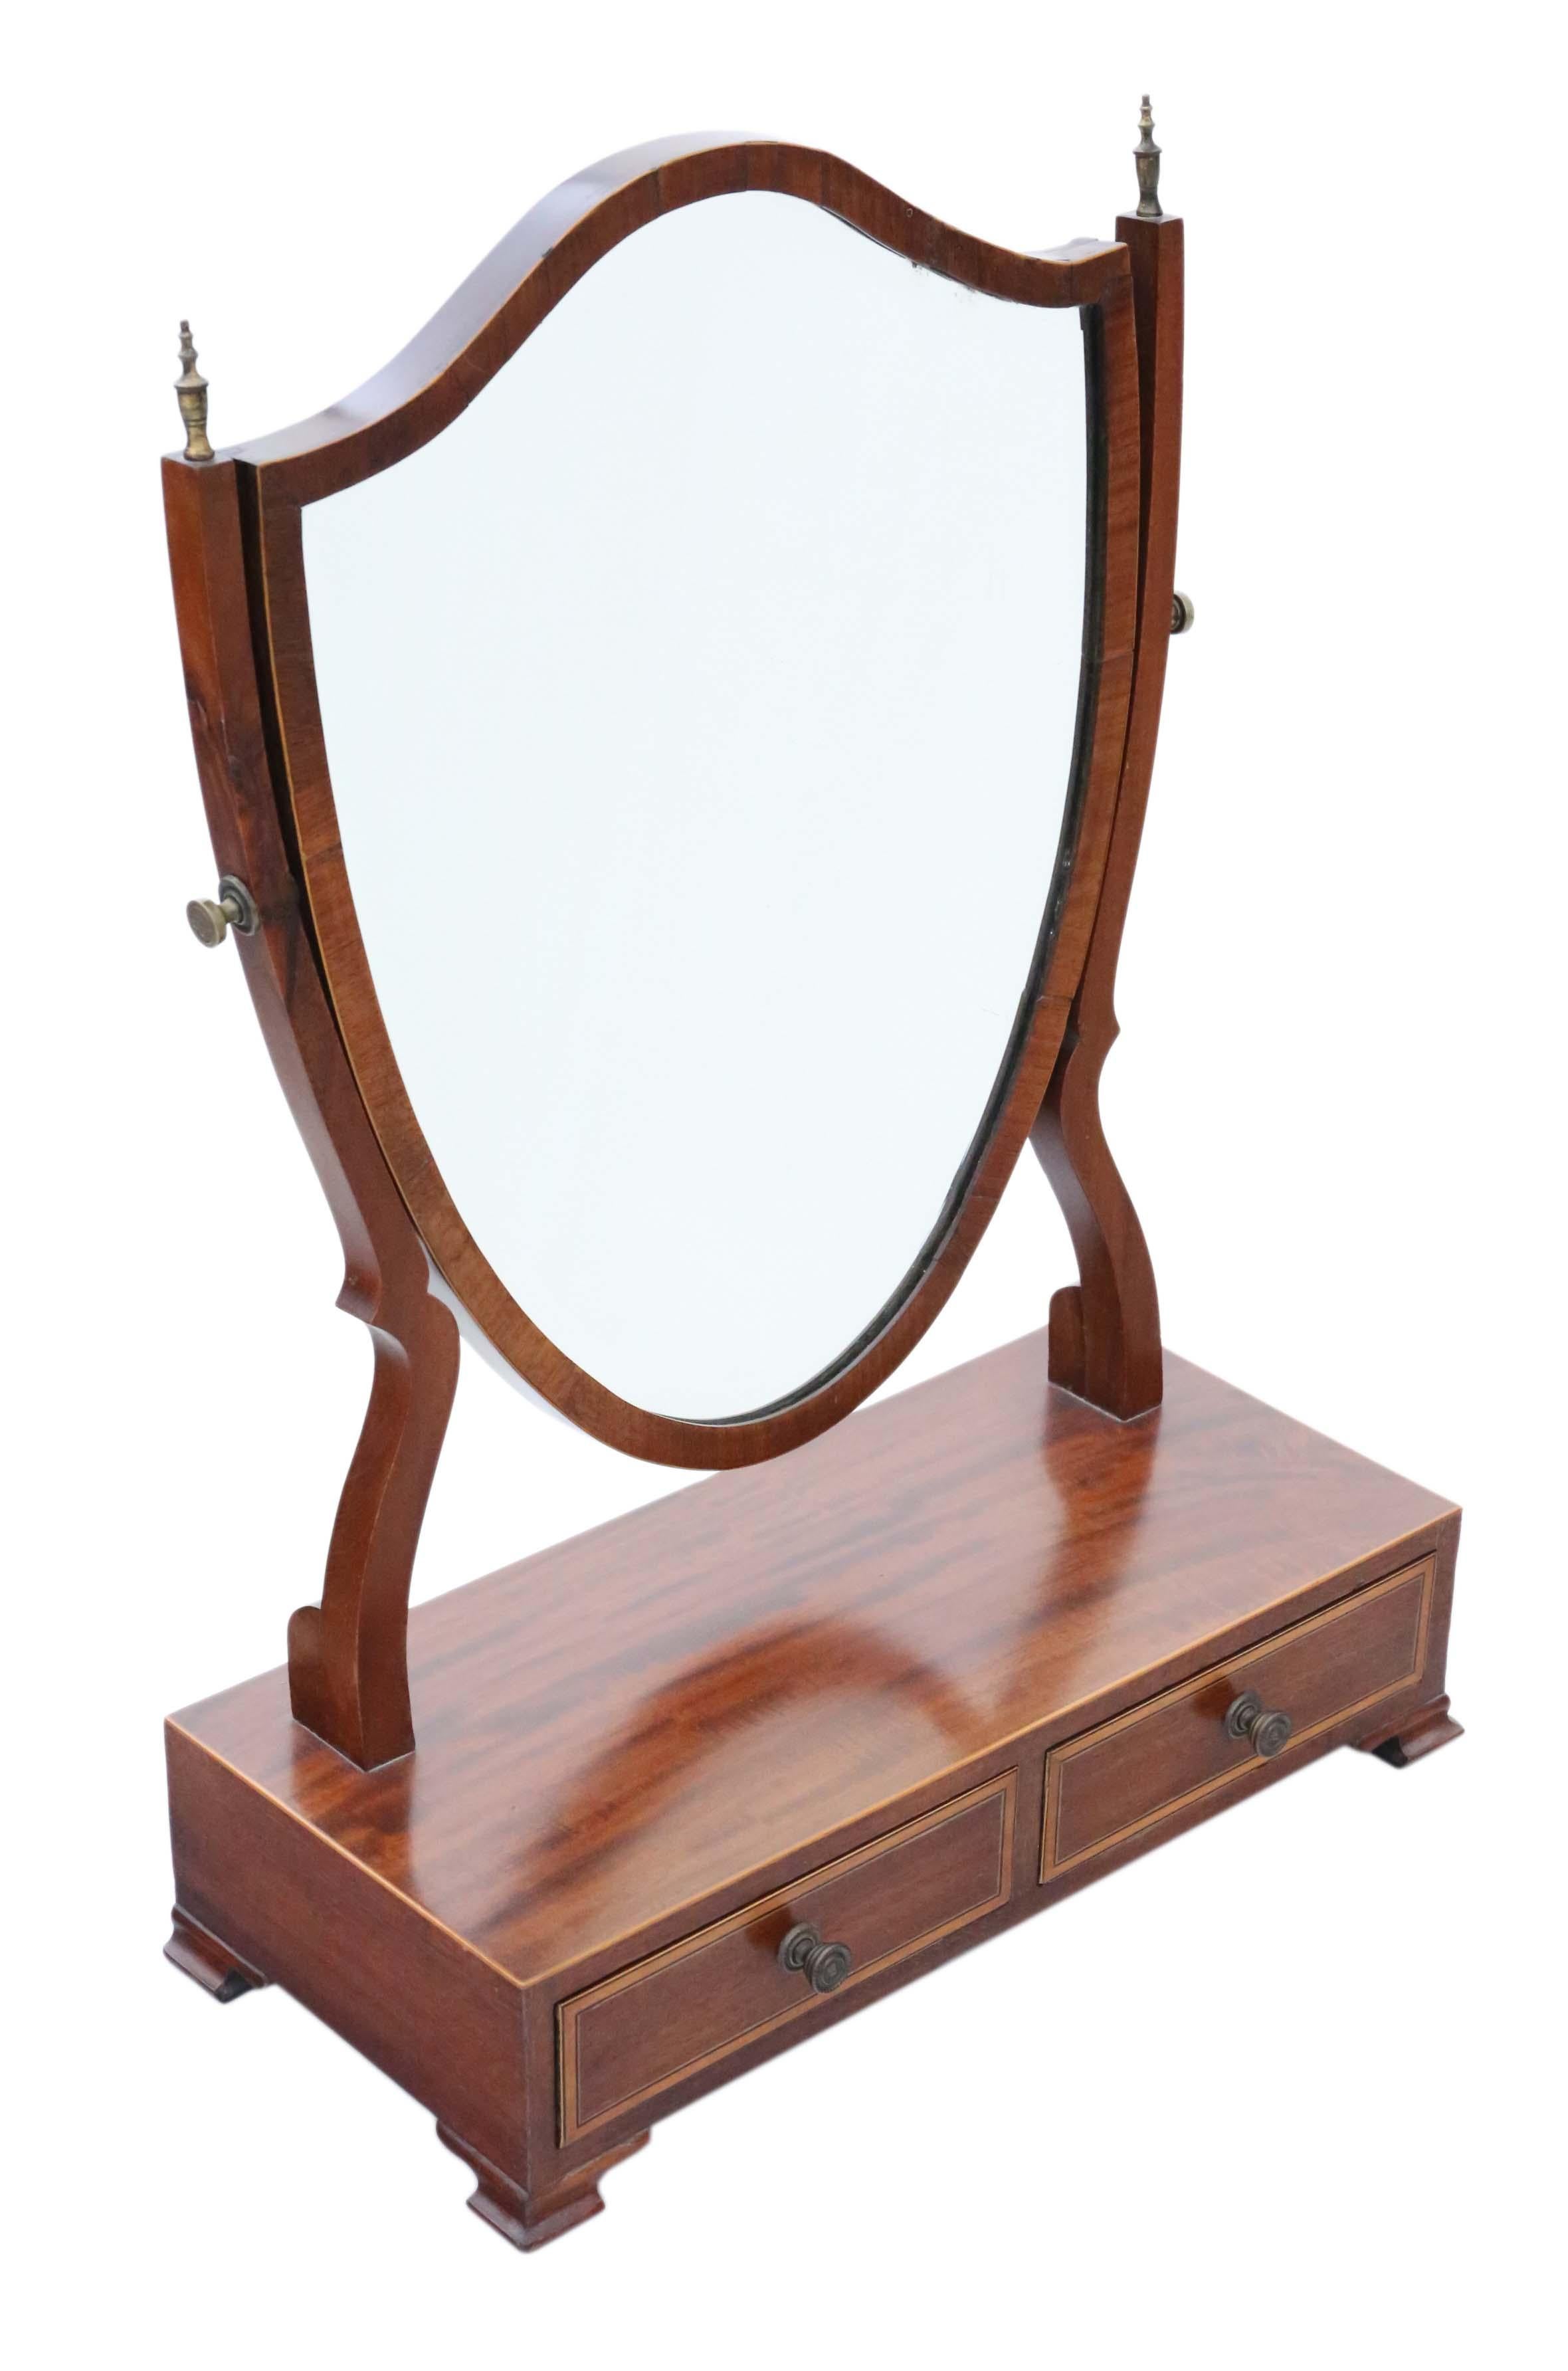 Antique Quality 19th Century Mahogany Shield Dressing Table Swing Mirror In Good Condition For Sale In Wisbech, Cambridgeshire